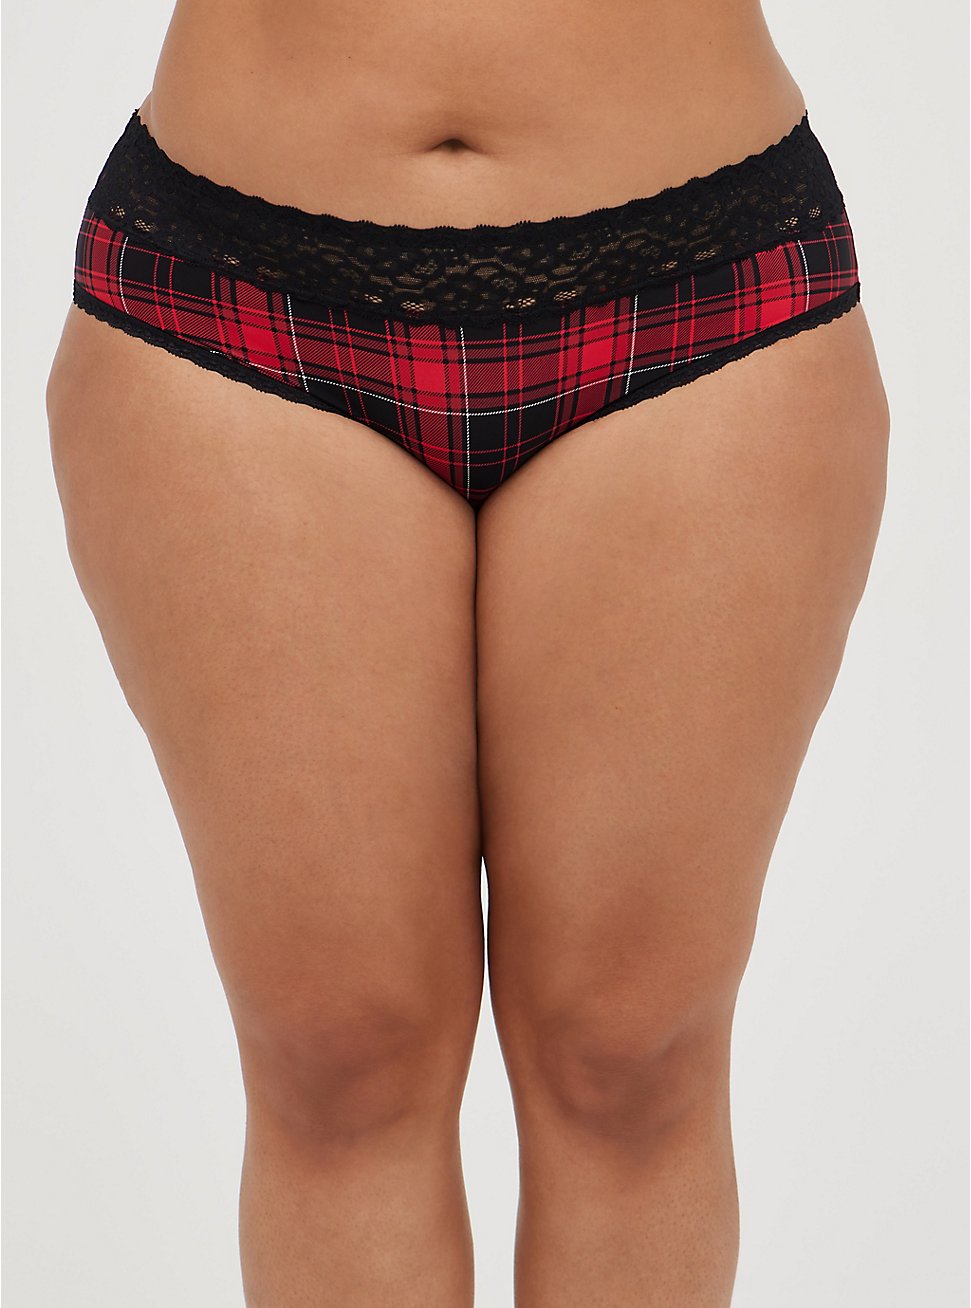 Second Skin Hipster Panty - Wide Lace Plaid Red, NY PLAID, hi-res